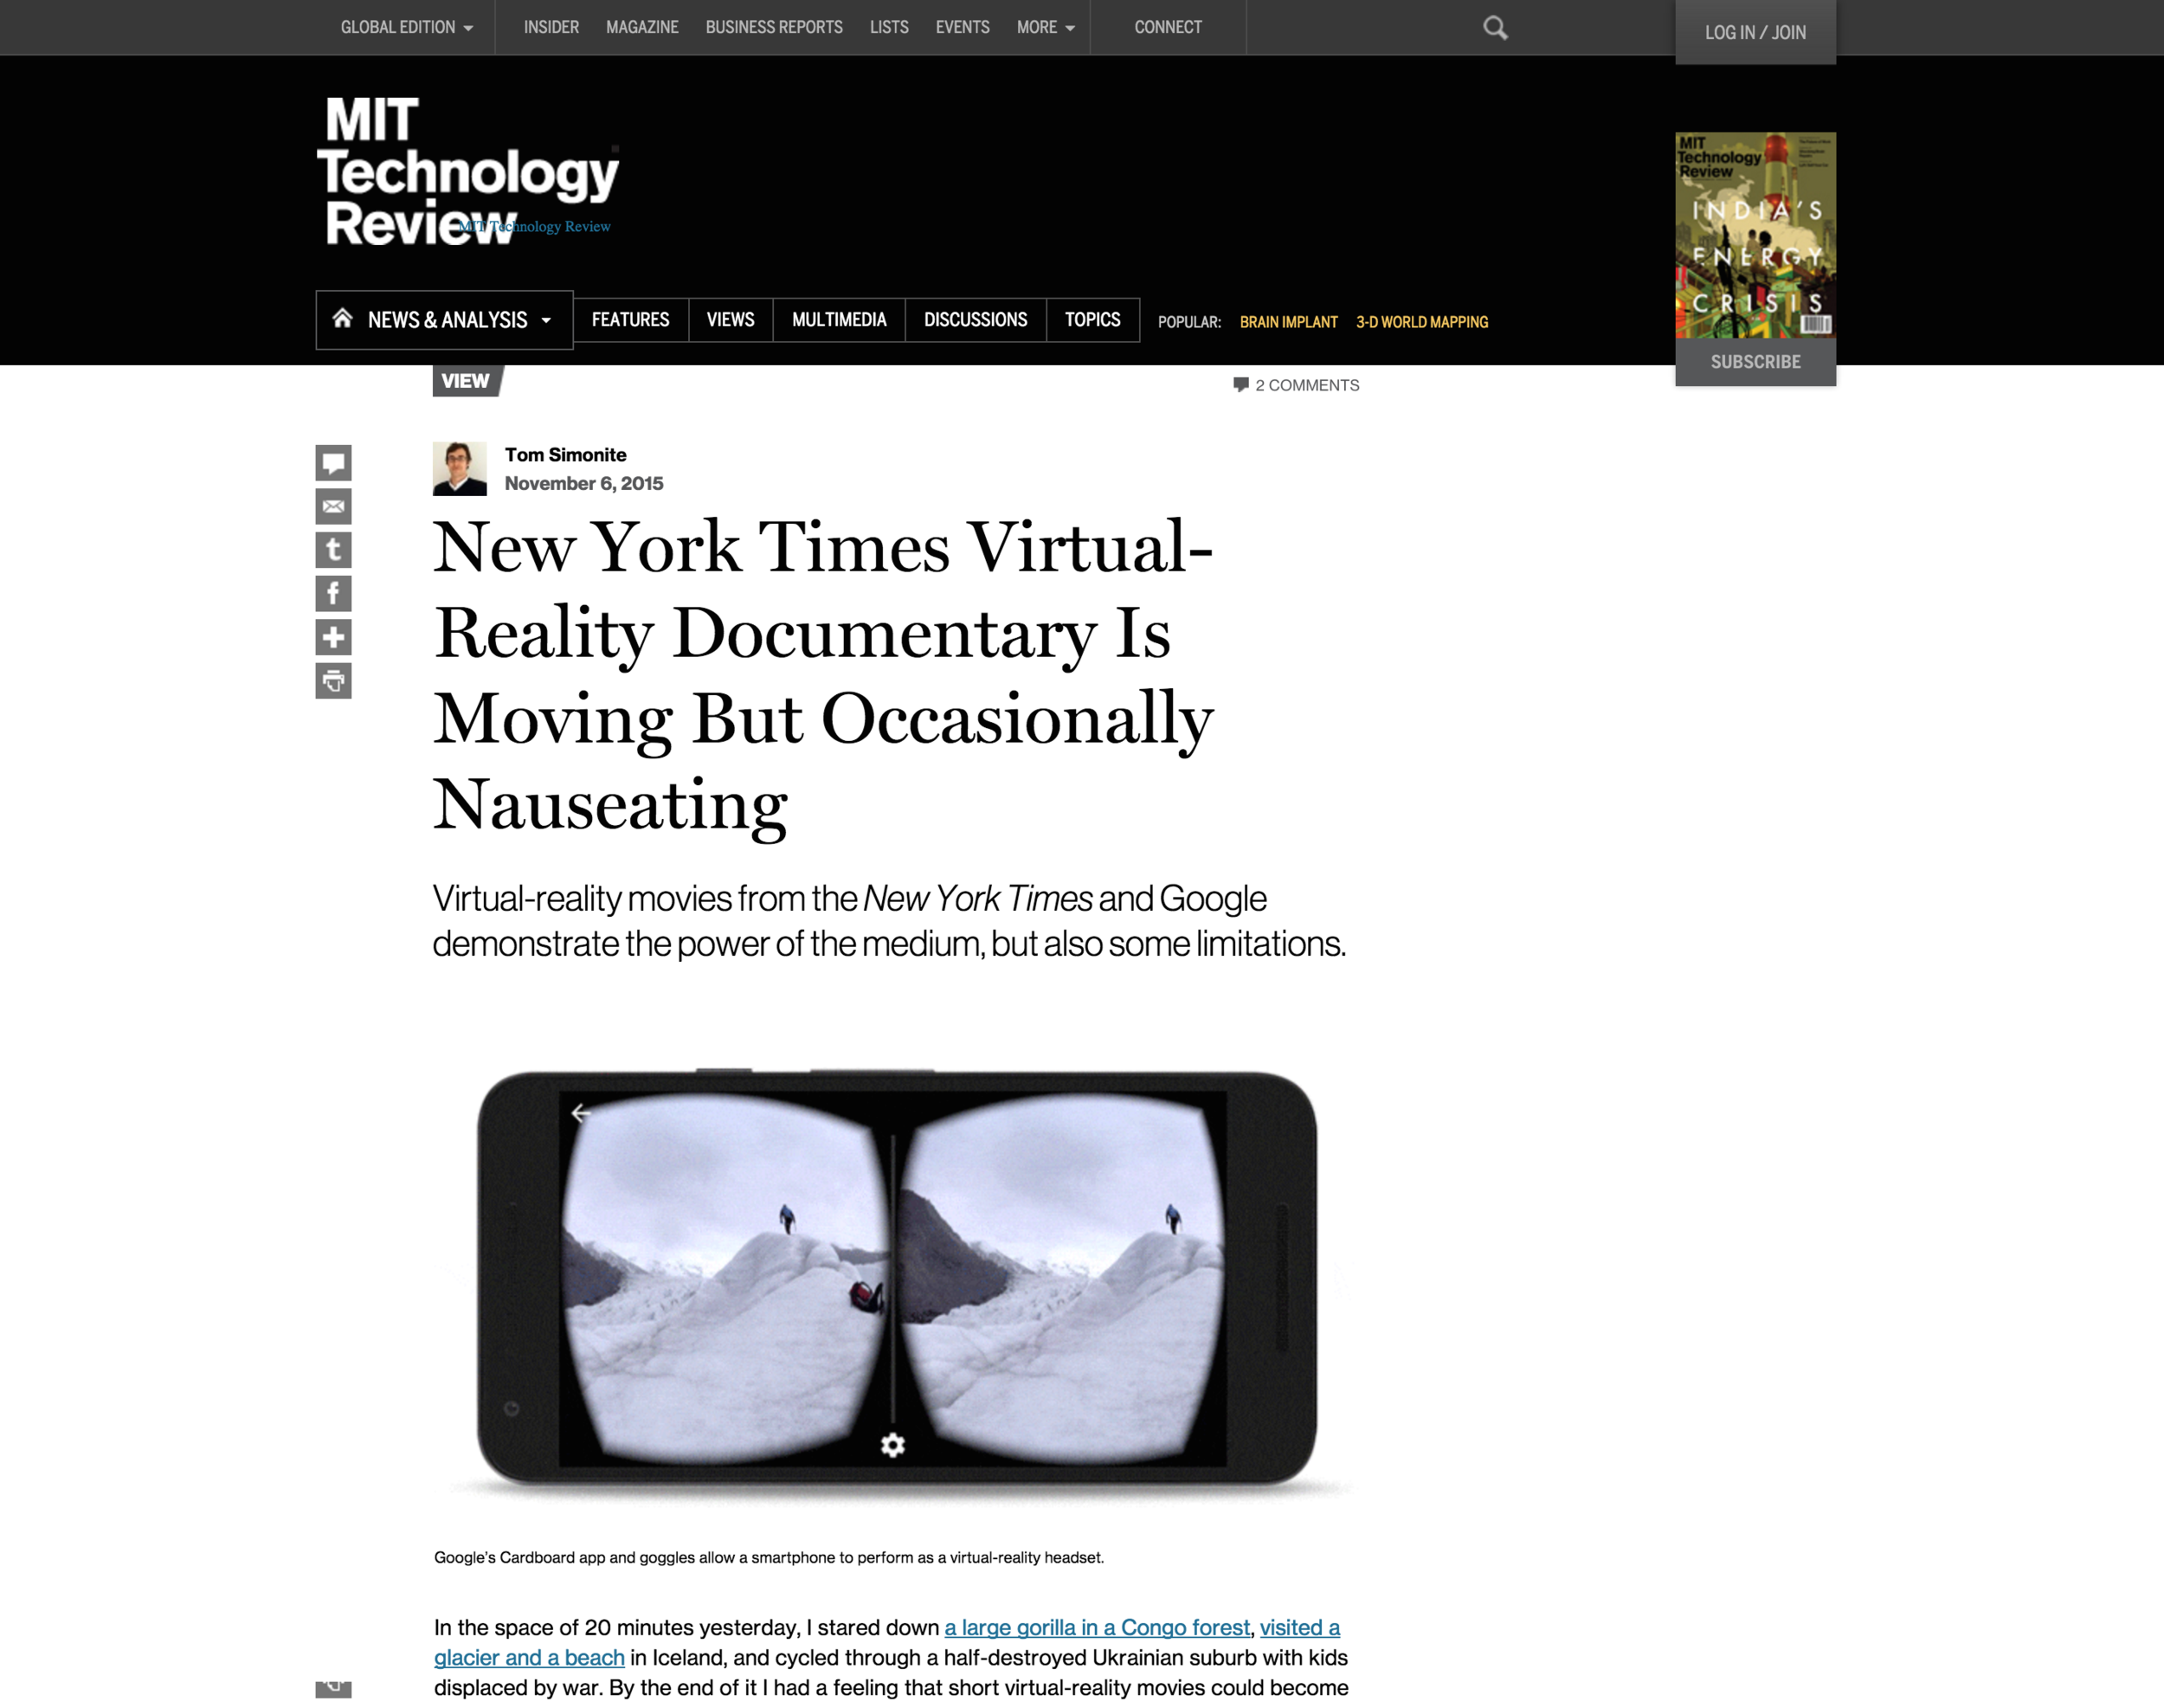 screencapture-www-technologyreview-com-view-543216-new-york-times-virtual-reality-documentary-is-moving-but-occasionally-nauseating-1447202415497.png